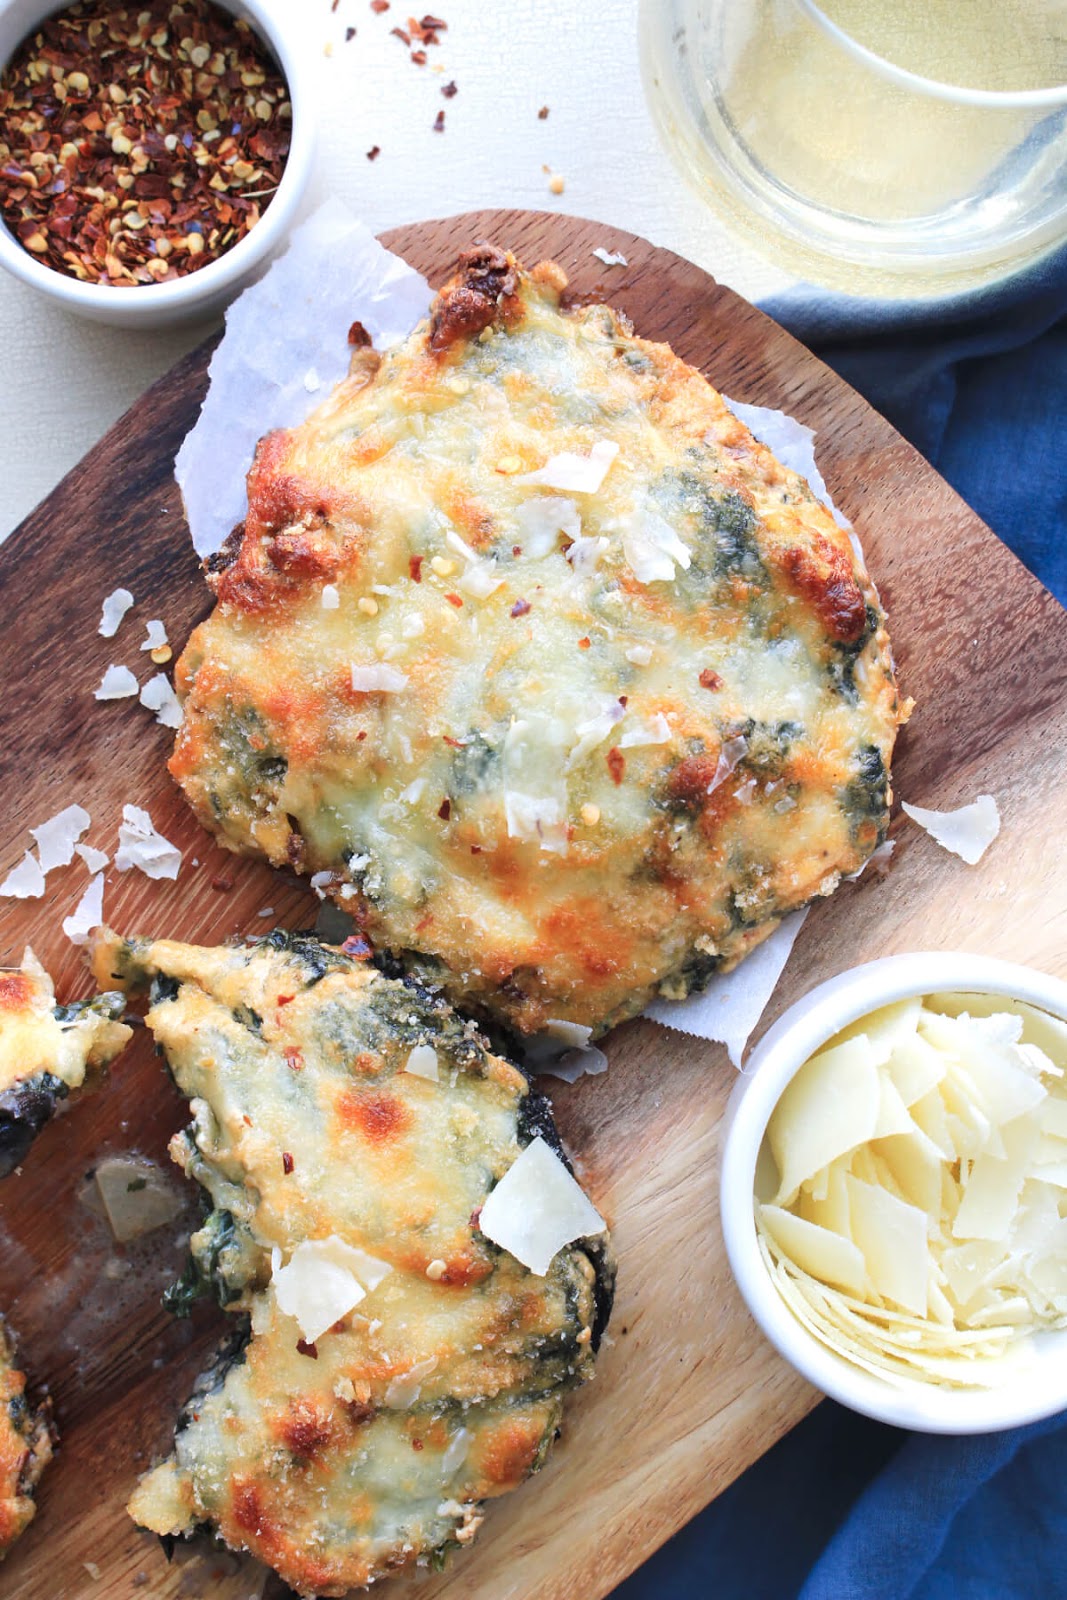 Spinach and Cheese Stuffed Portobello Mushrooms make a rich and decadent side dish or light main dish! The creamy, cheesy filling paired with the earthy mushrooms is ridiculously good!